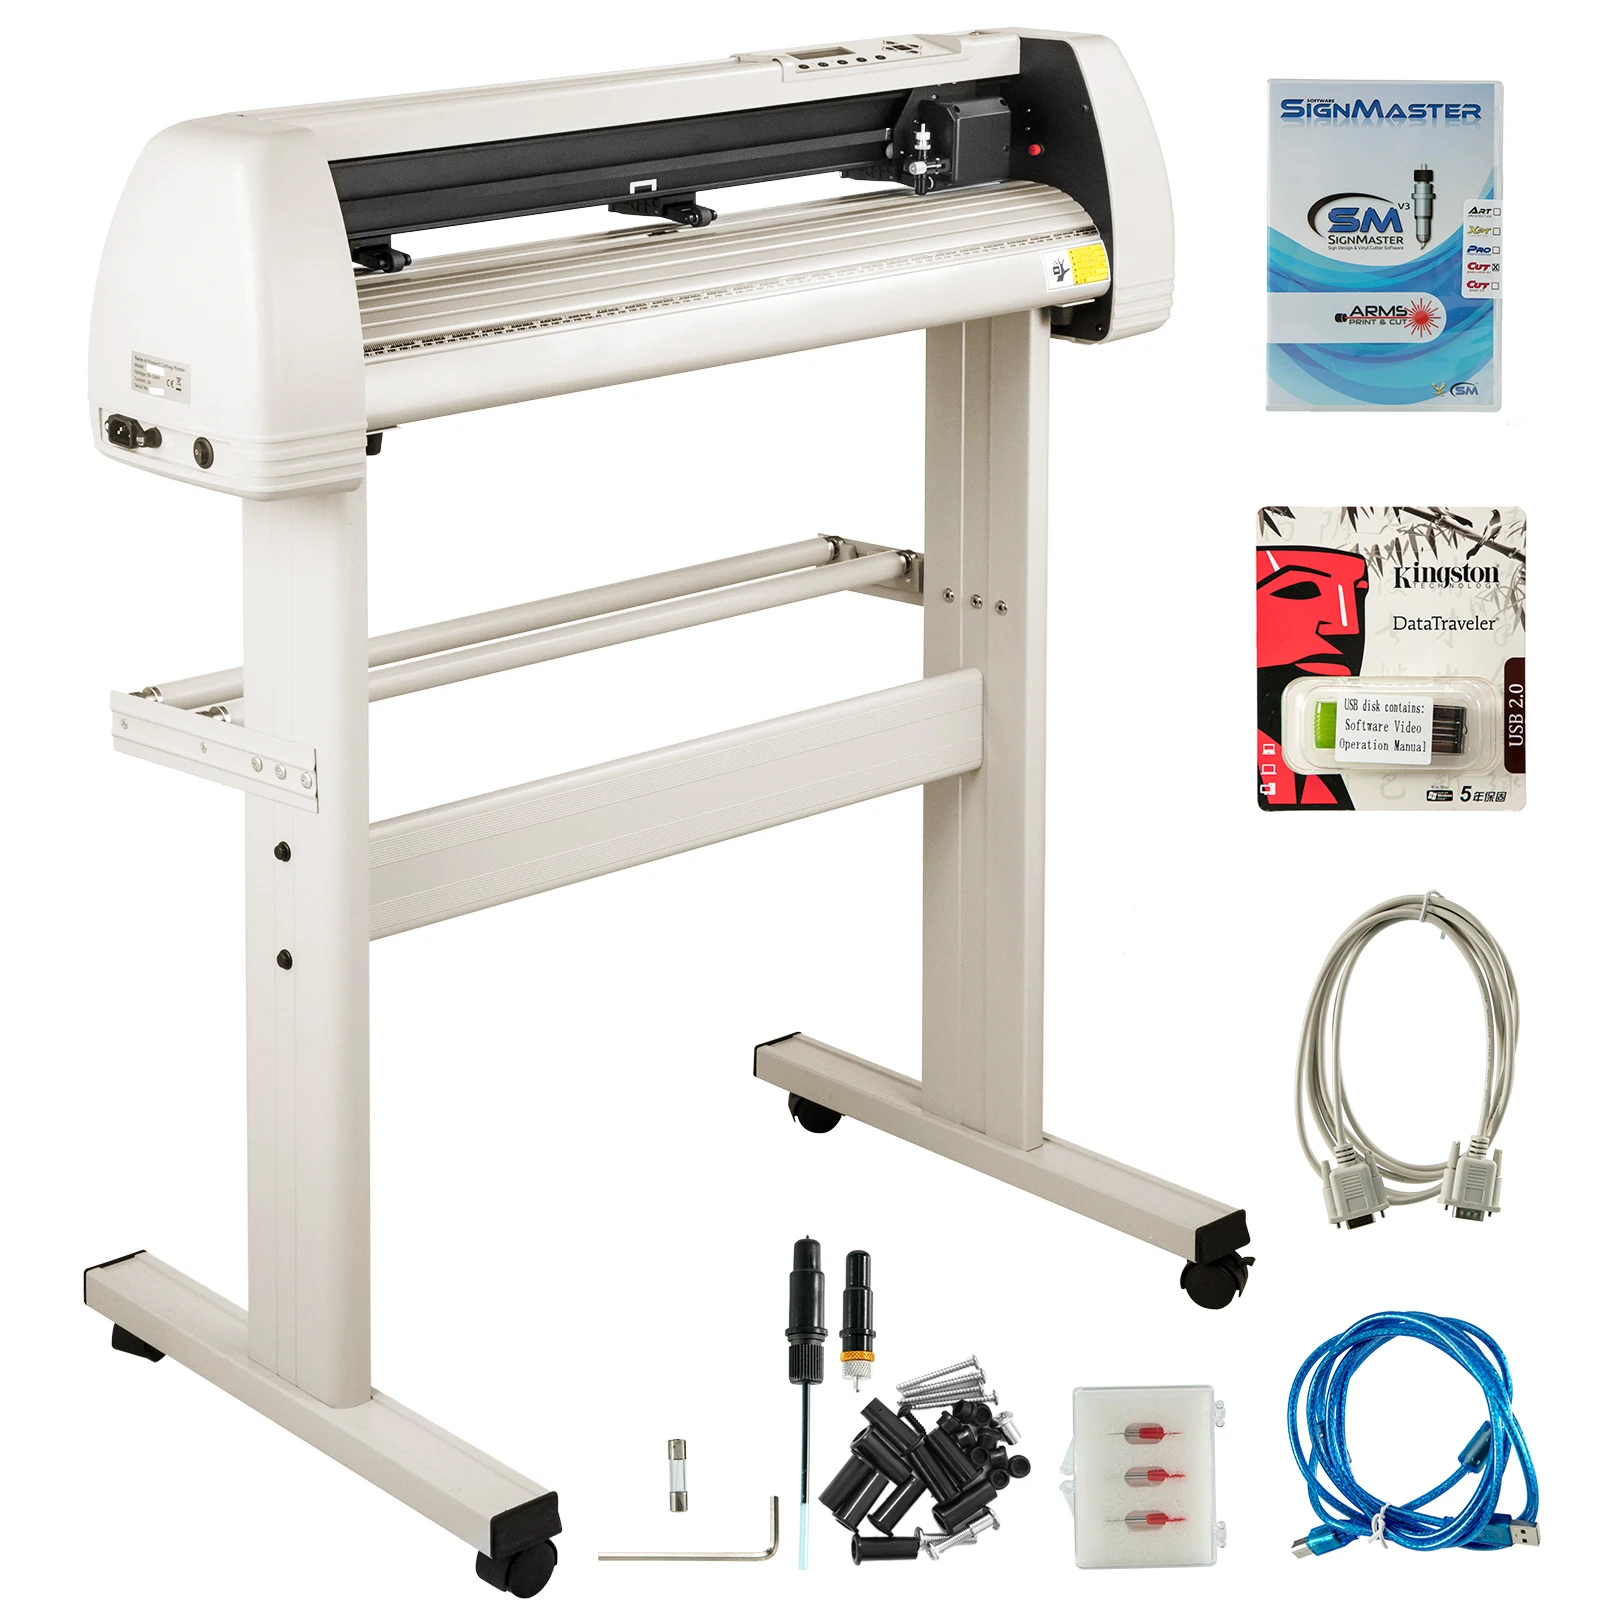 VEVOR 28 Inch Vinyl Cutter Plotter Cutting Machine with Signmaster Software & 20 Blades Printing for T-Shirts Signs Stickers